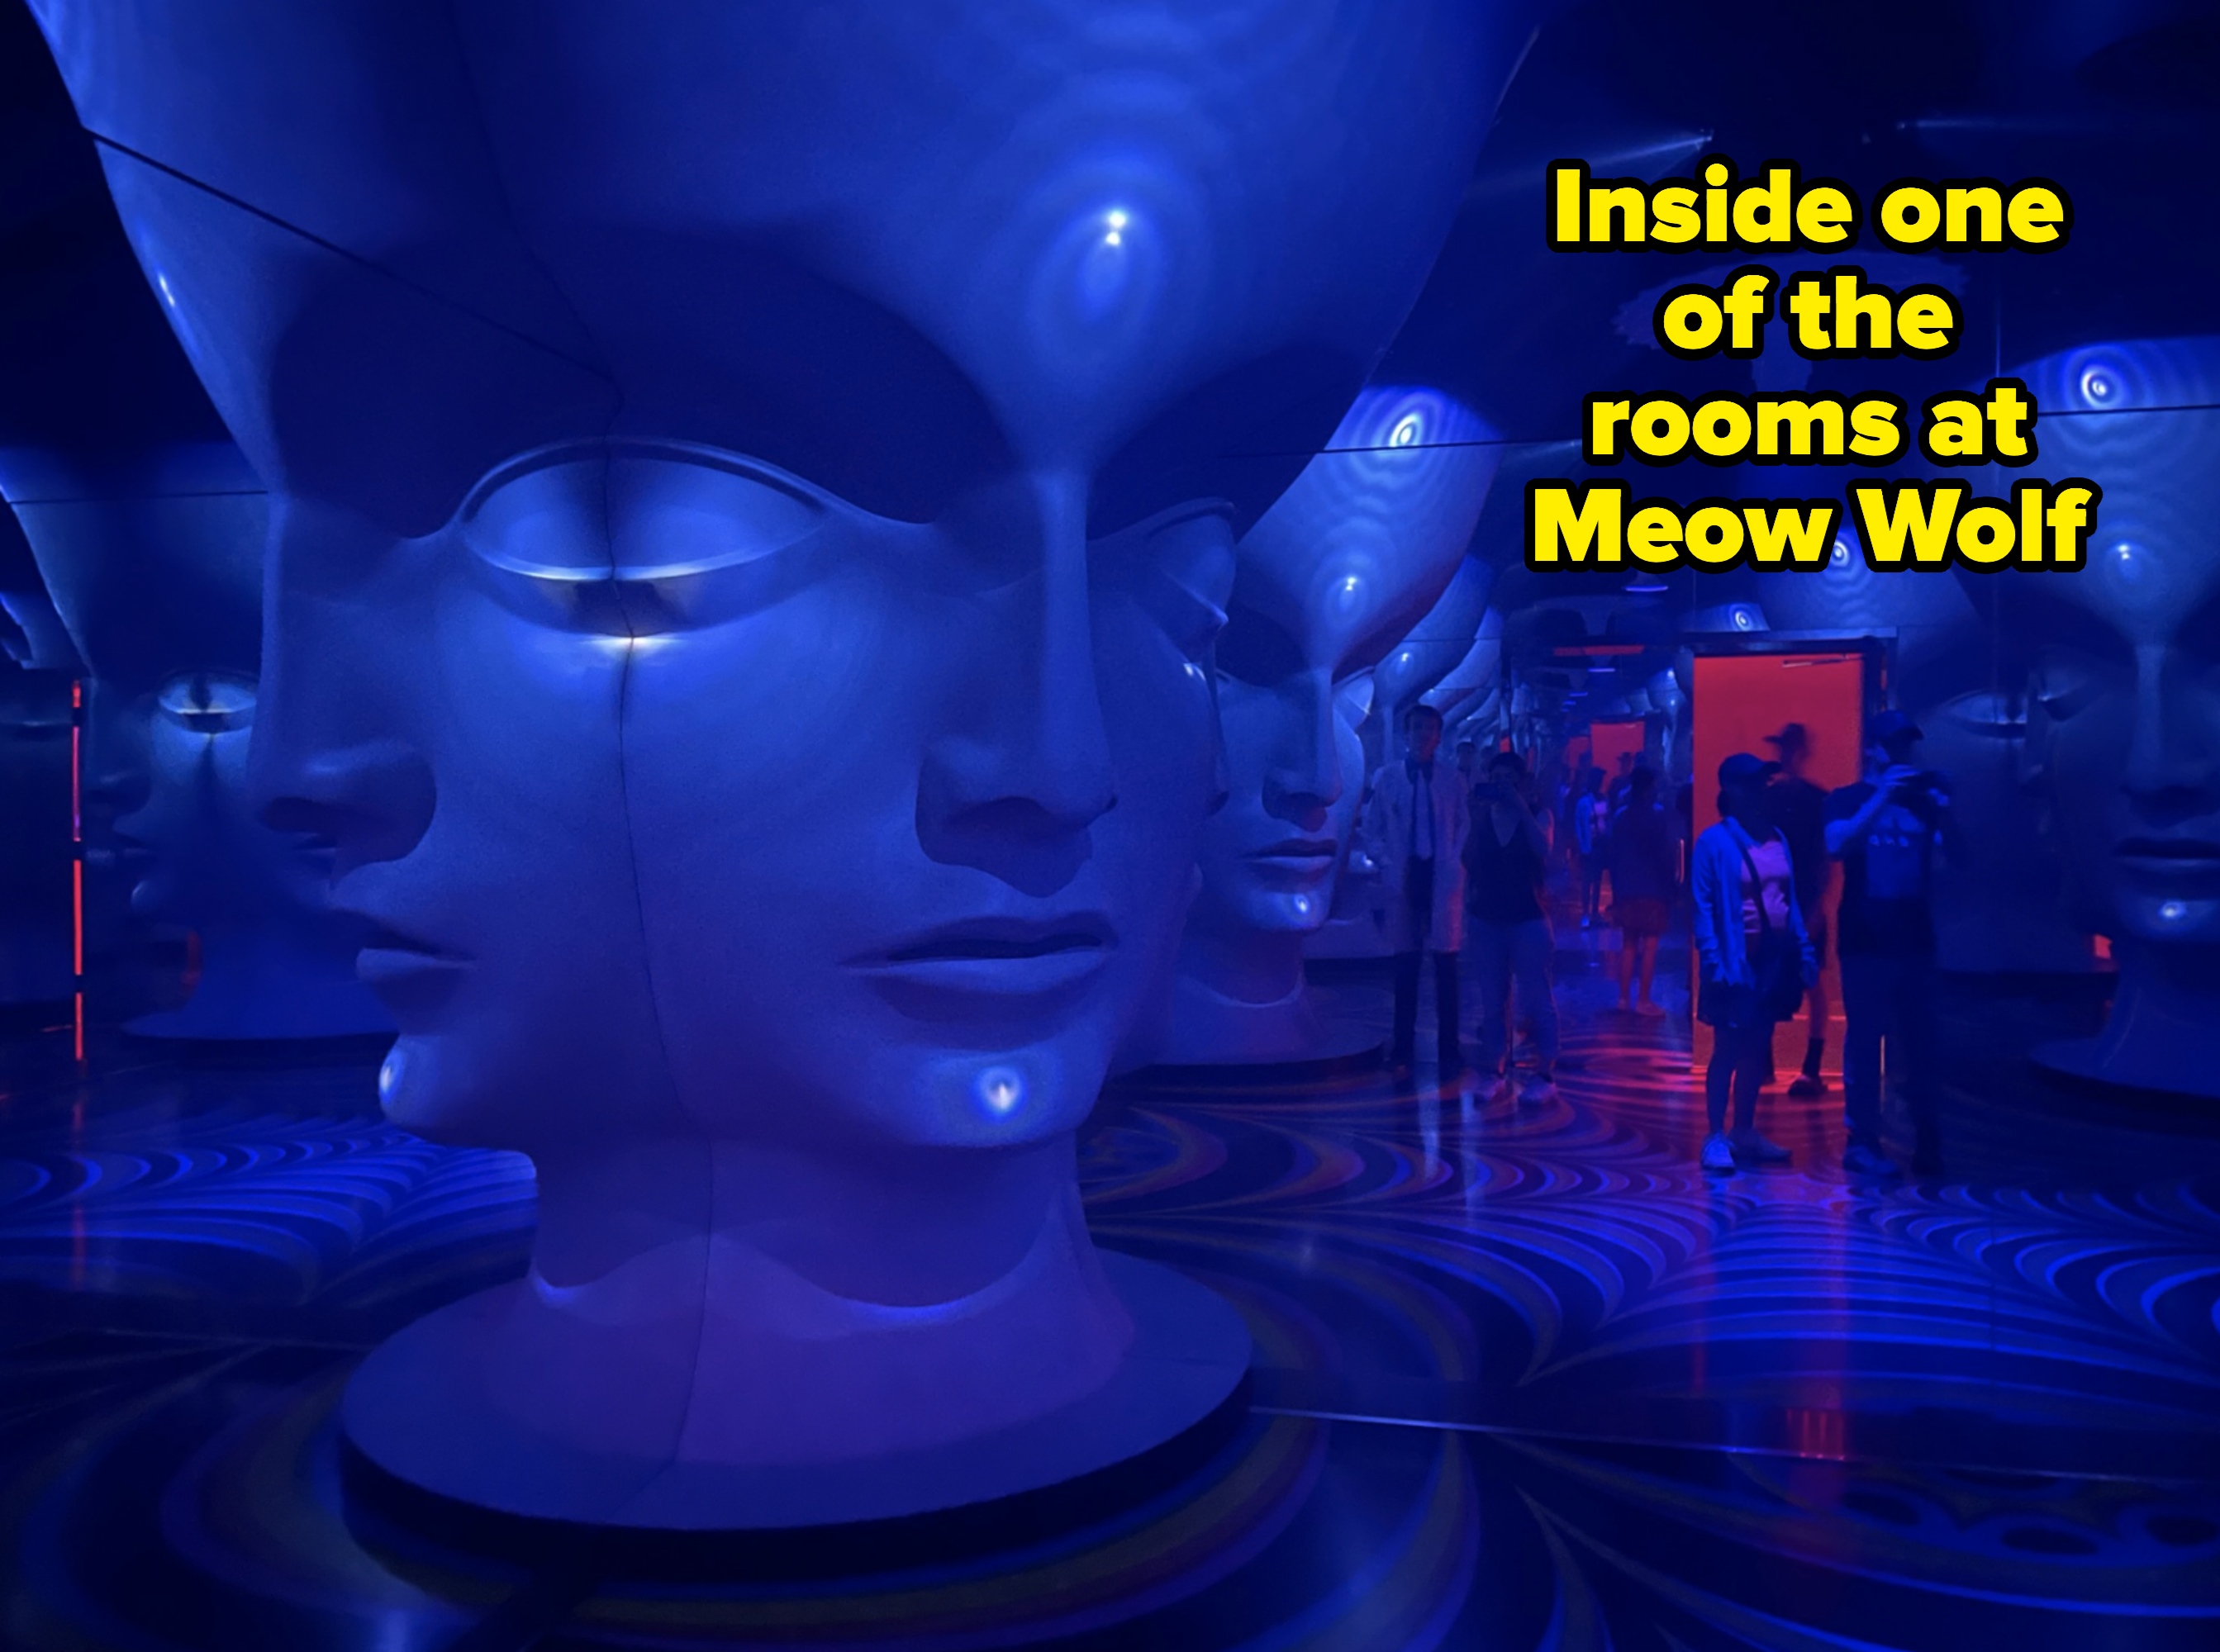 Inside a room at Meow Wolf